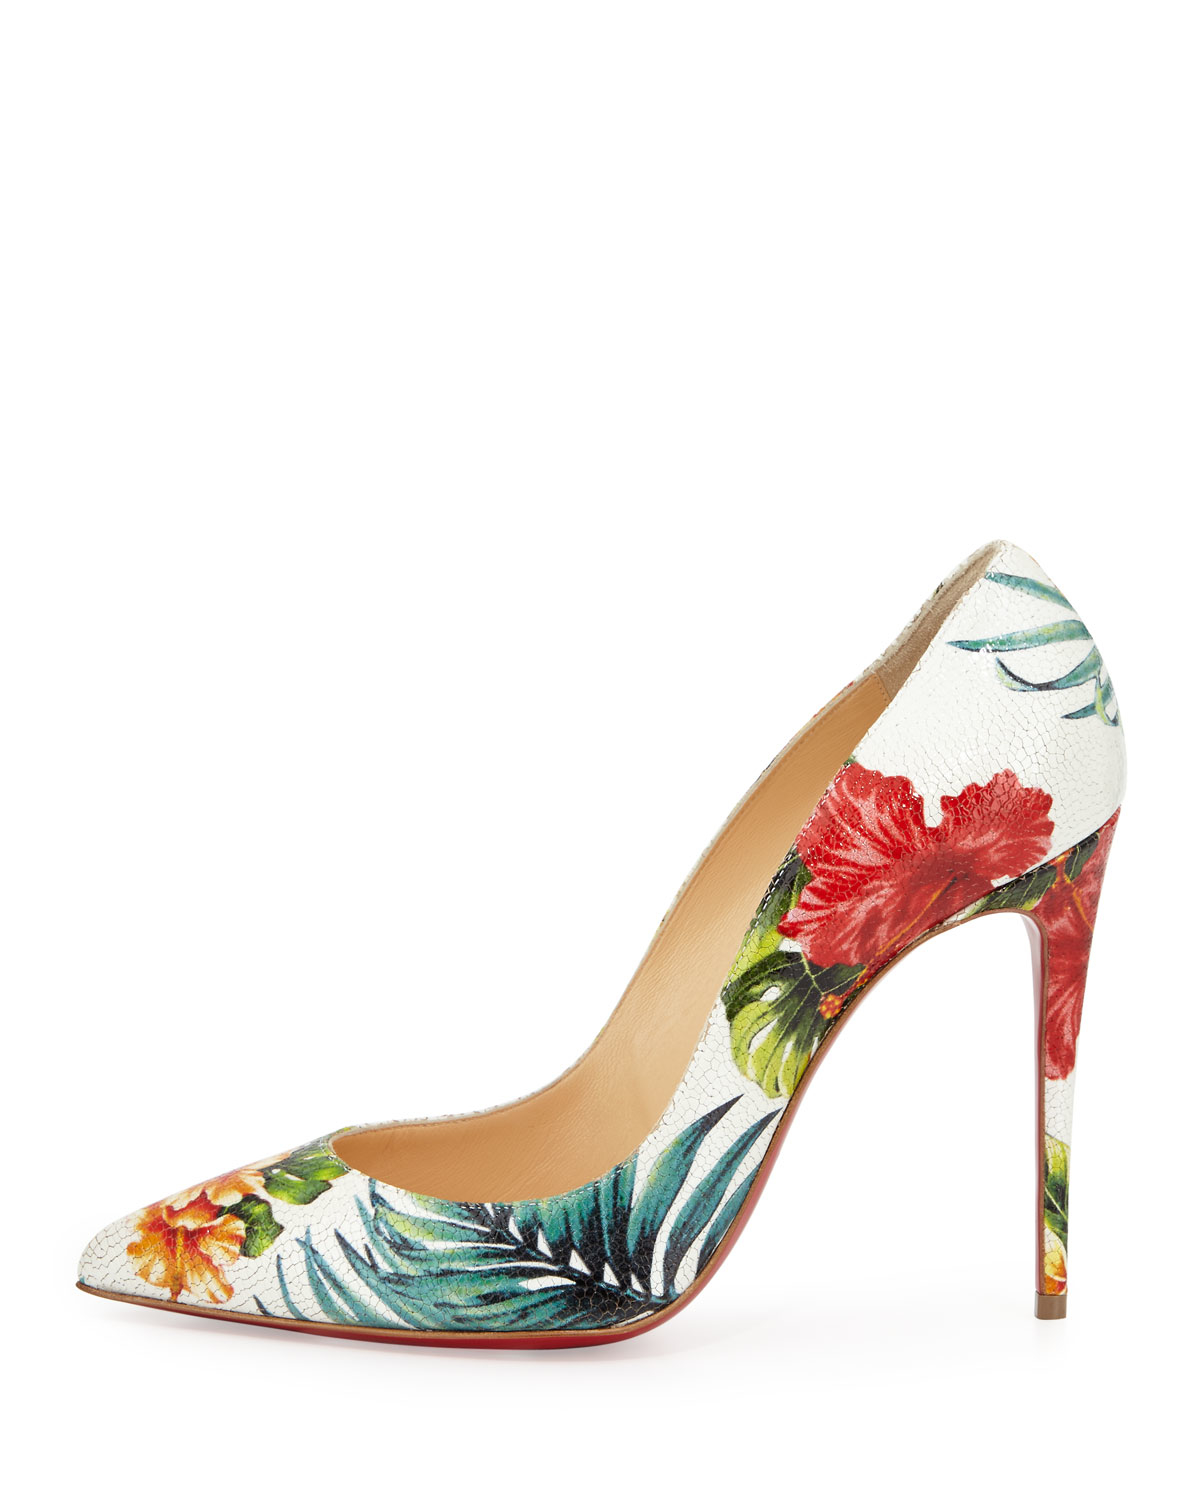 Christian Louboutin Pigalle Follies Hawaii Pumps in White - Lyst